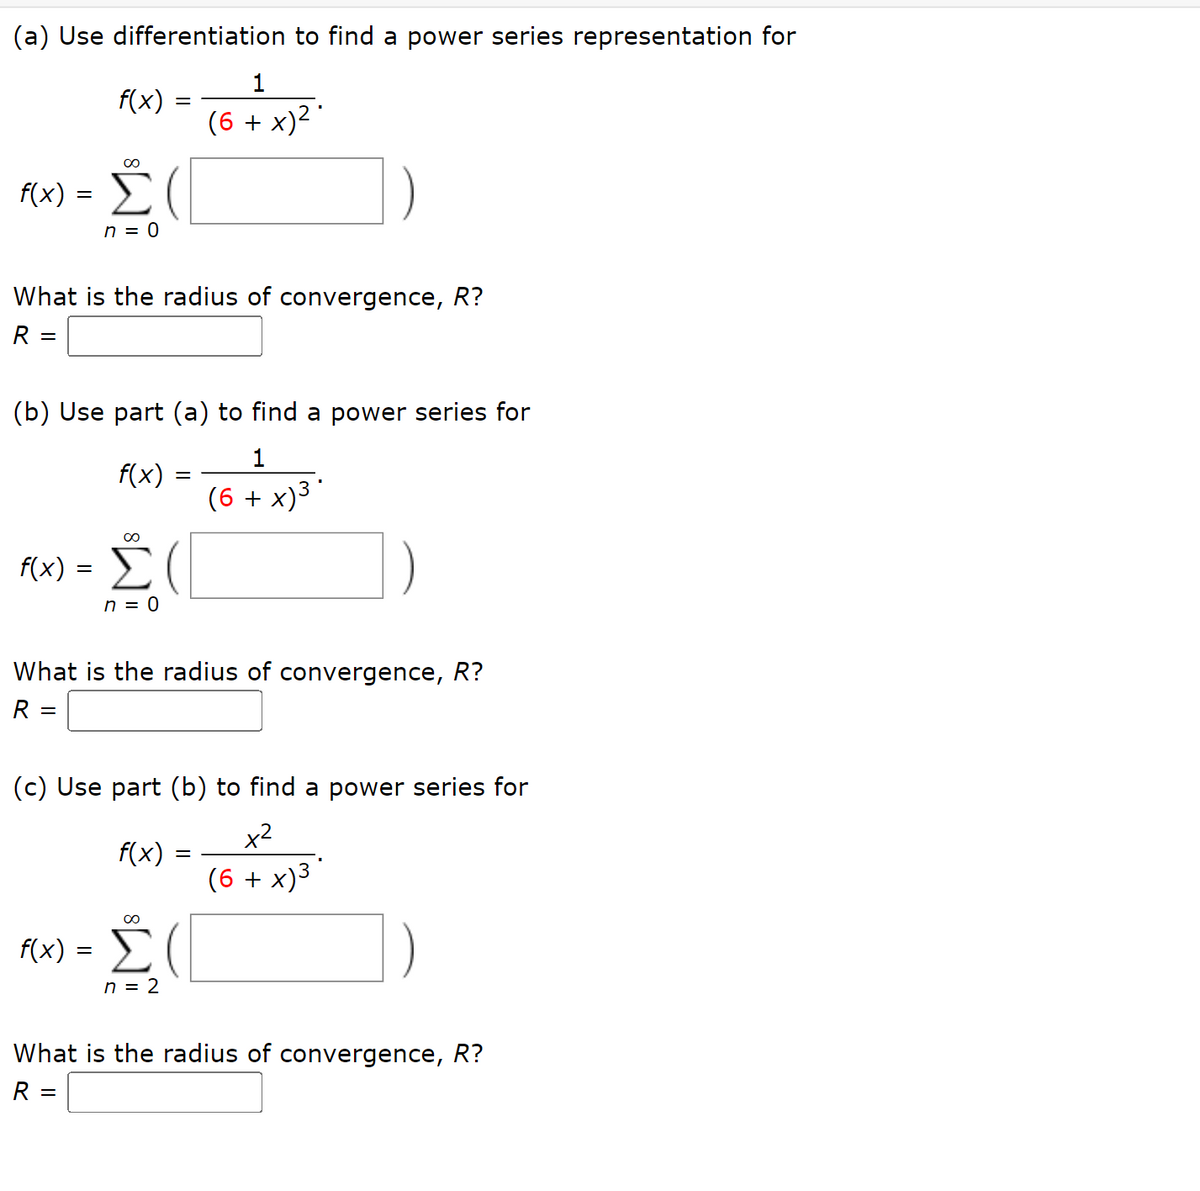 (a) Use differentiation to find a power series representation for
1
f(x)
(6 + x)² '
Č (
f(x)
%|
n = 0
What is the radius of convergence, R?
R
(b) Use part (a) to find a power series for
1
f(x)
(6 + x)3
00
f(x) = (
Σ
n = 0
What is the radius of convergence, R?
R =
(c) Use part (b) to find a power series for
x2
f(x)
(6 + x)3
f(x) =
n = 2
What is the radius of convergence, R?
R =
